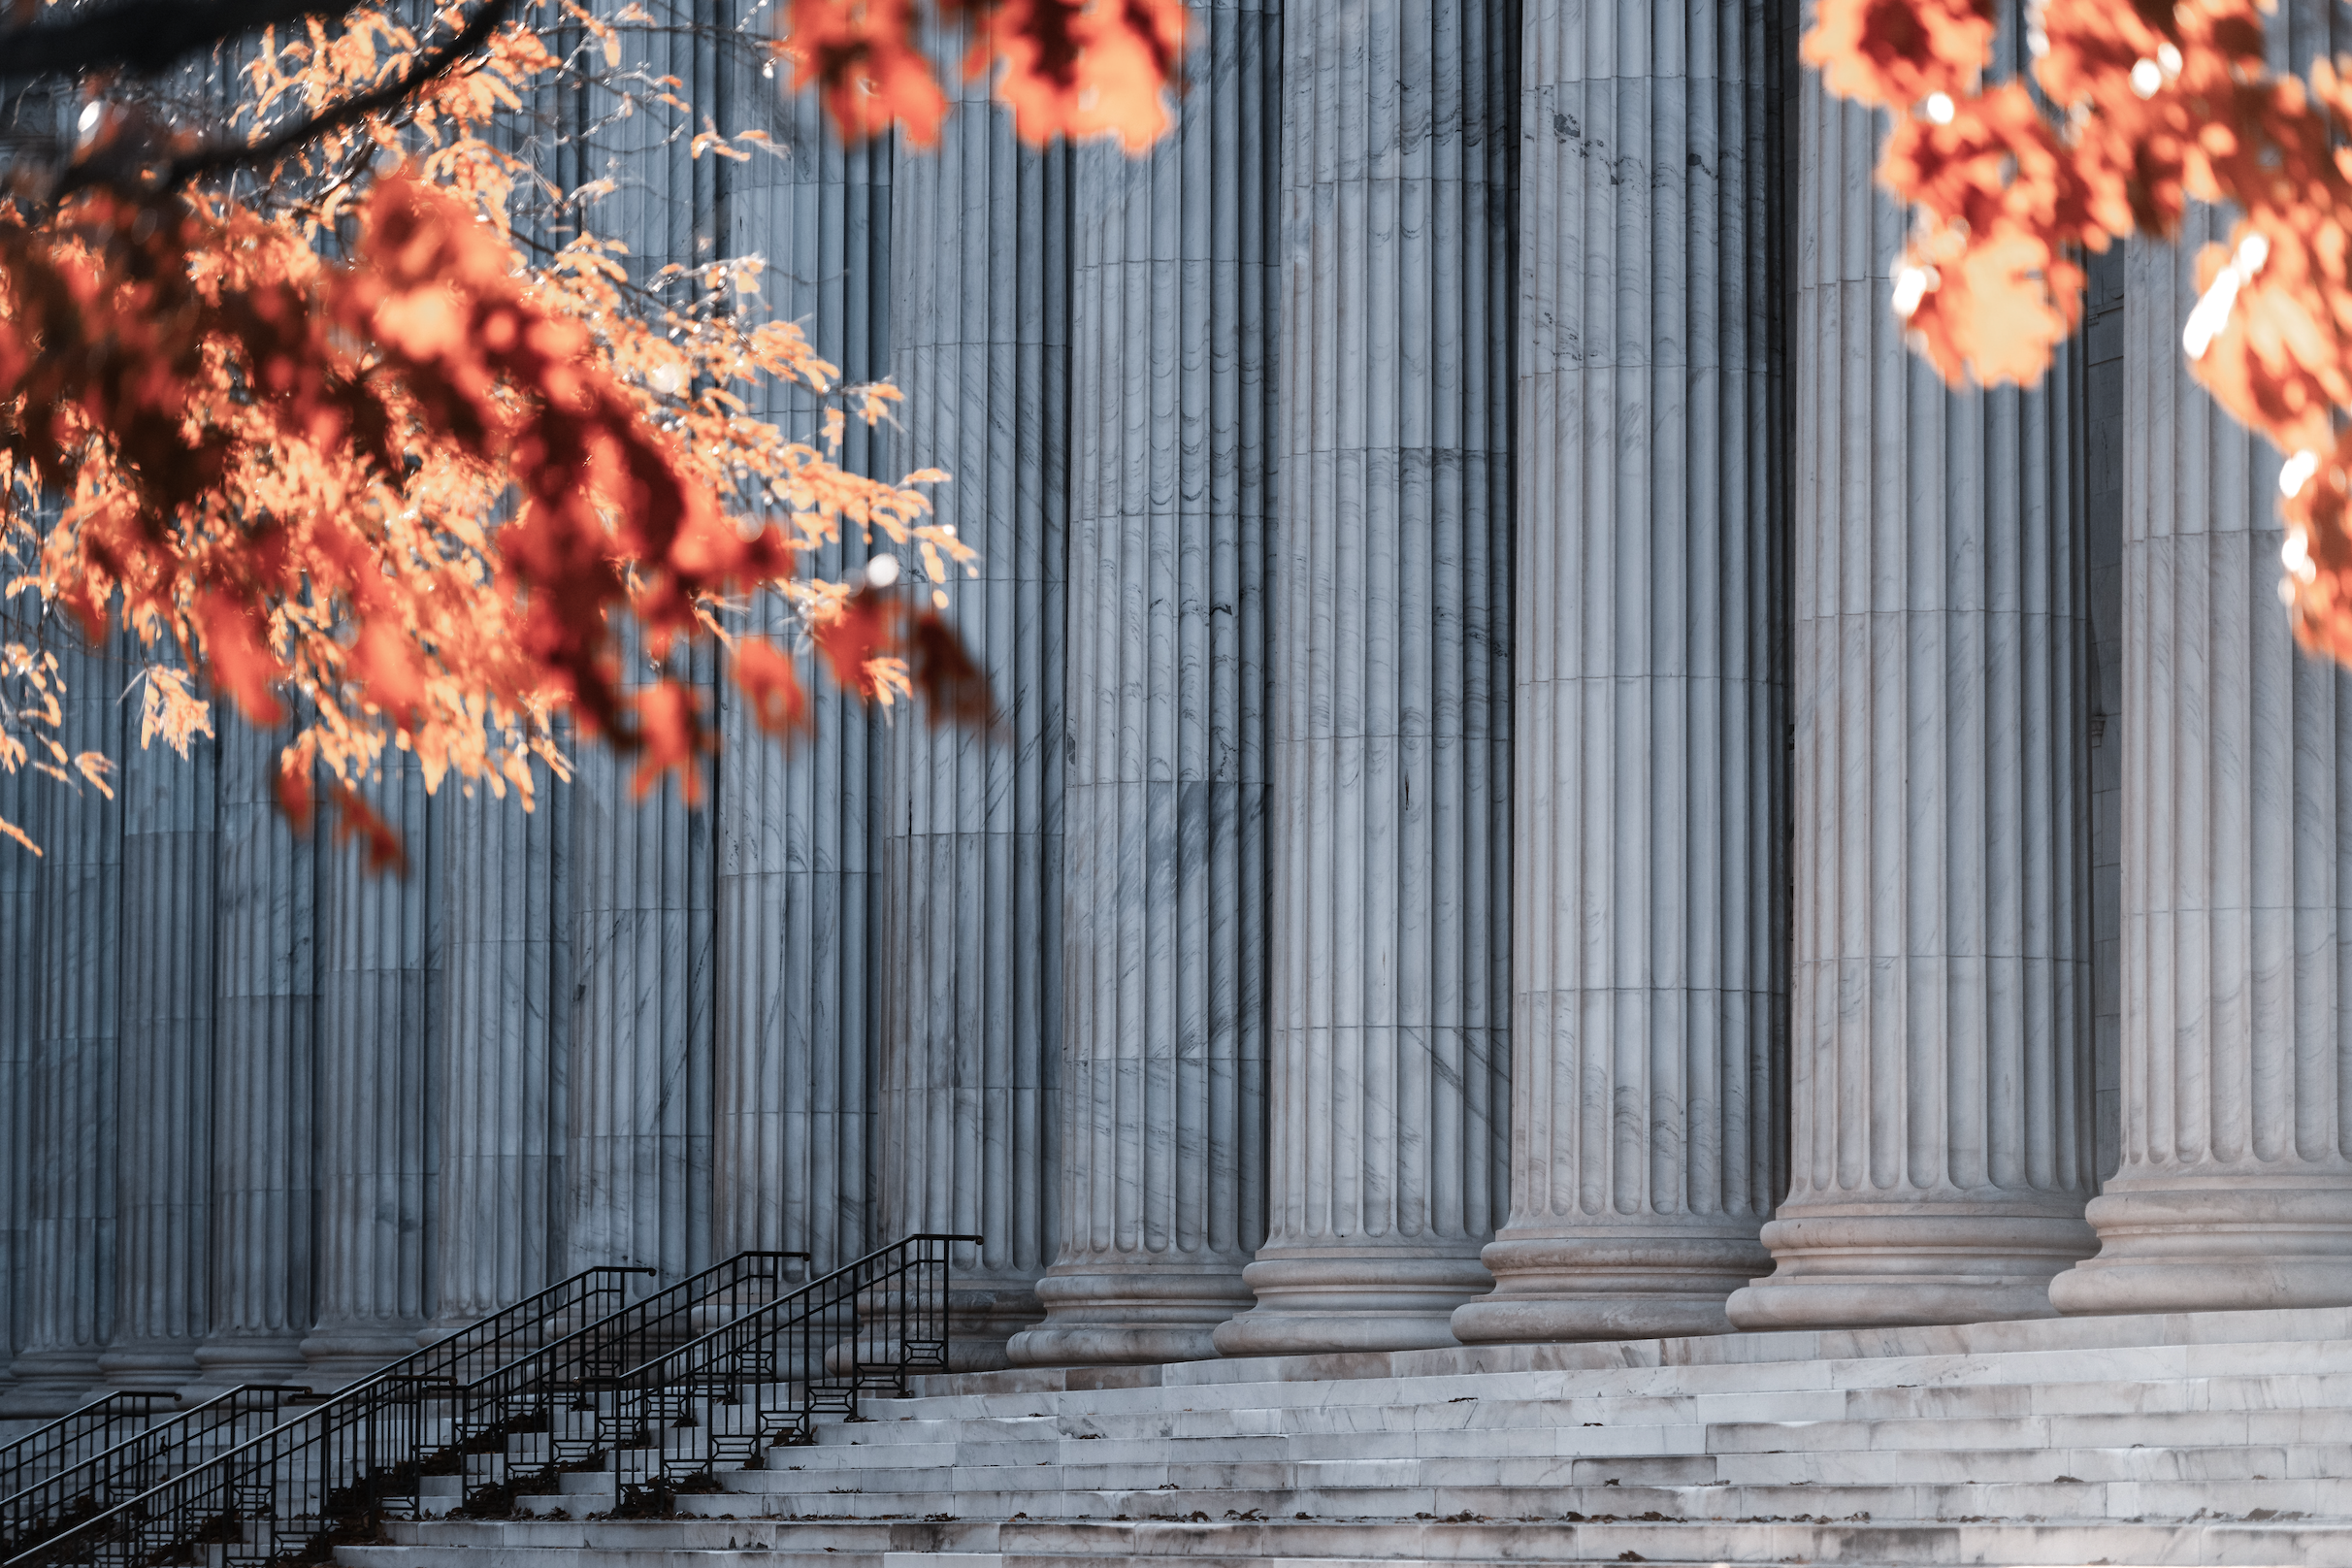 The outside pillars of a court house framed by red autumn leaves